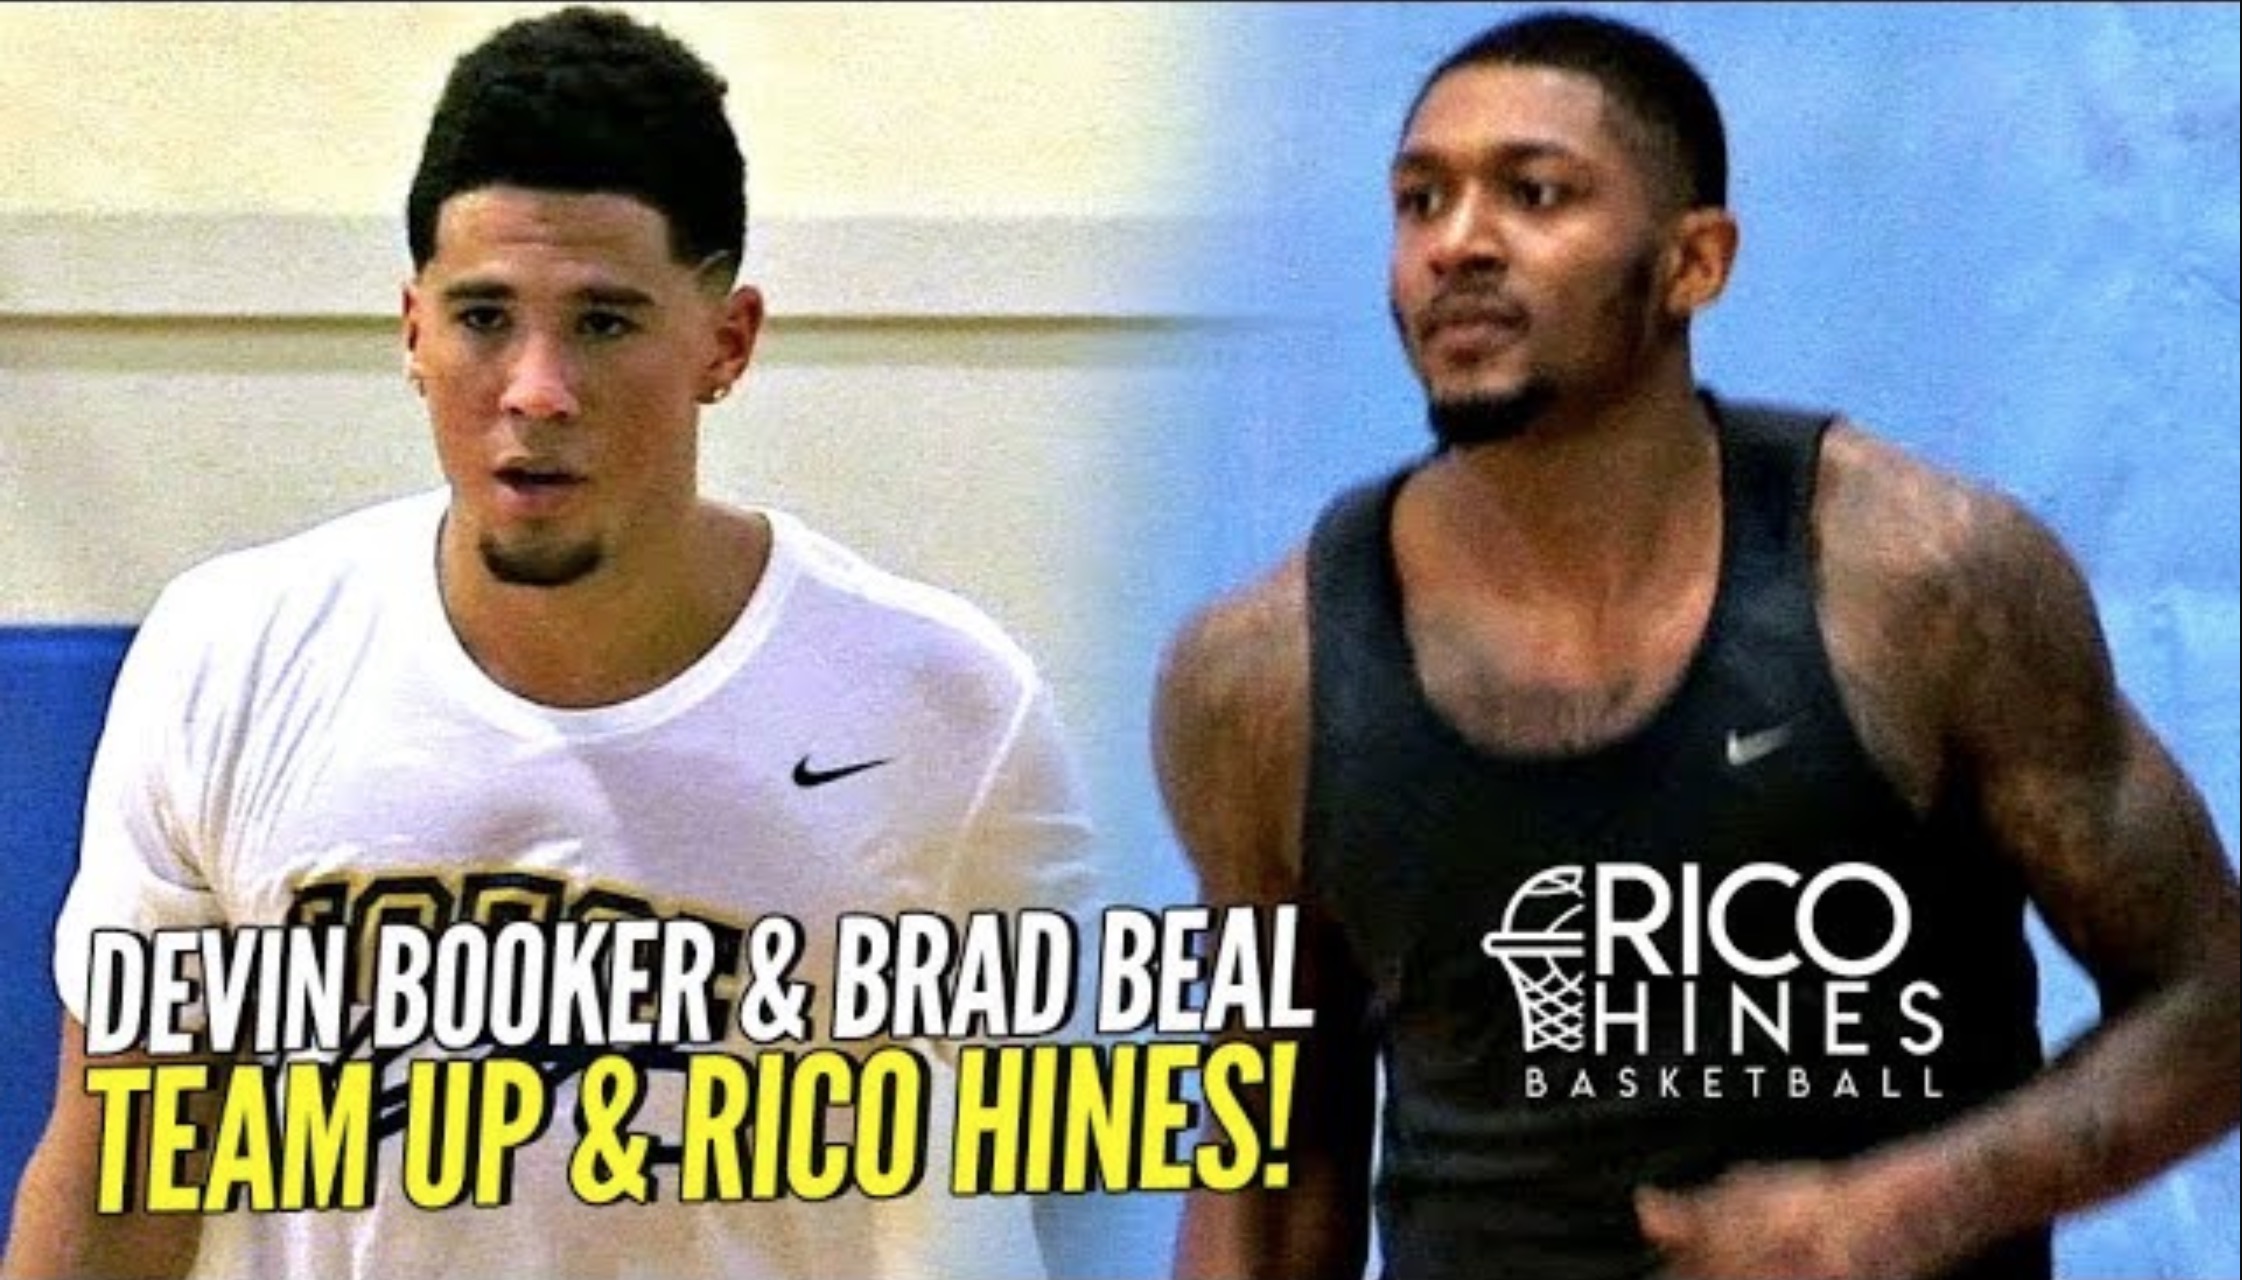 Devin Booker & Bradley Beal Rico Hines Workout